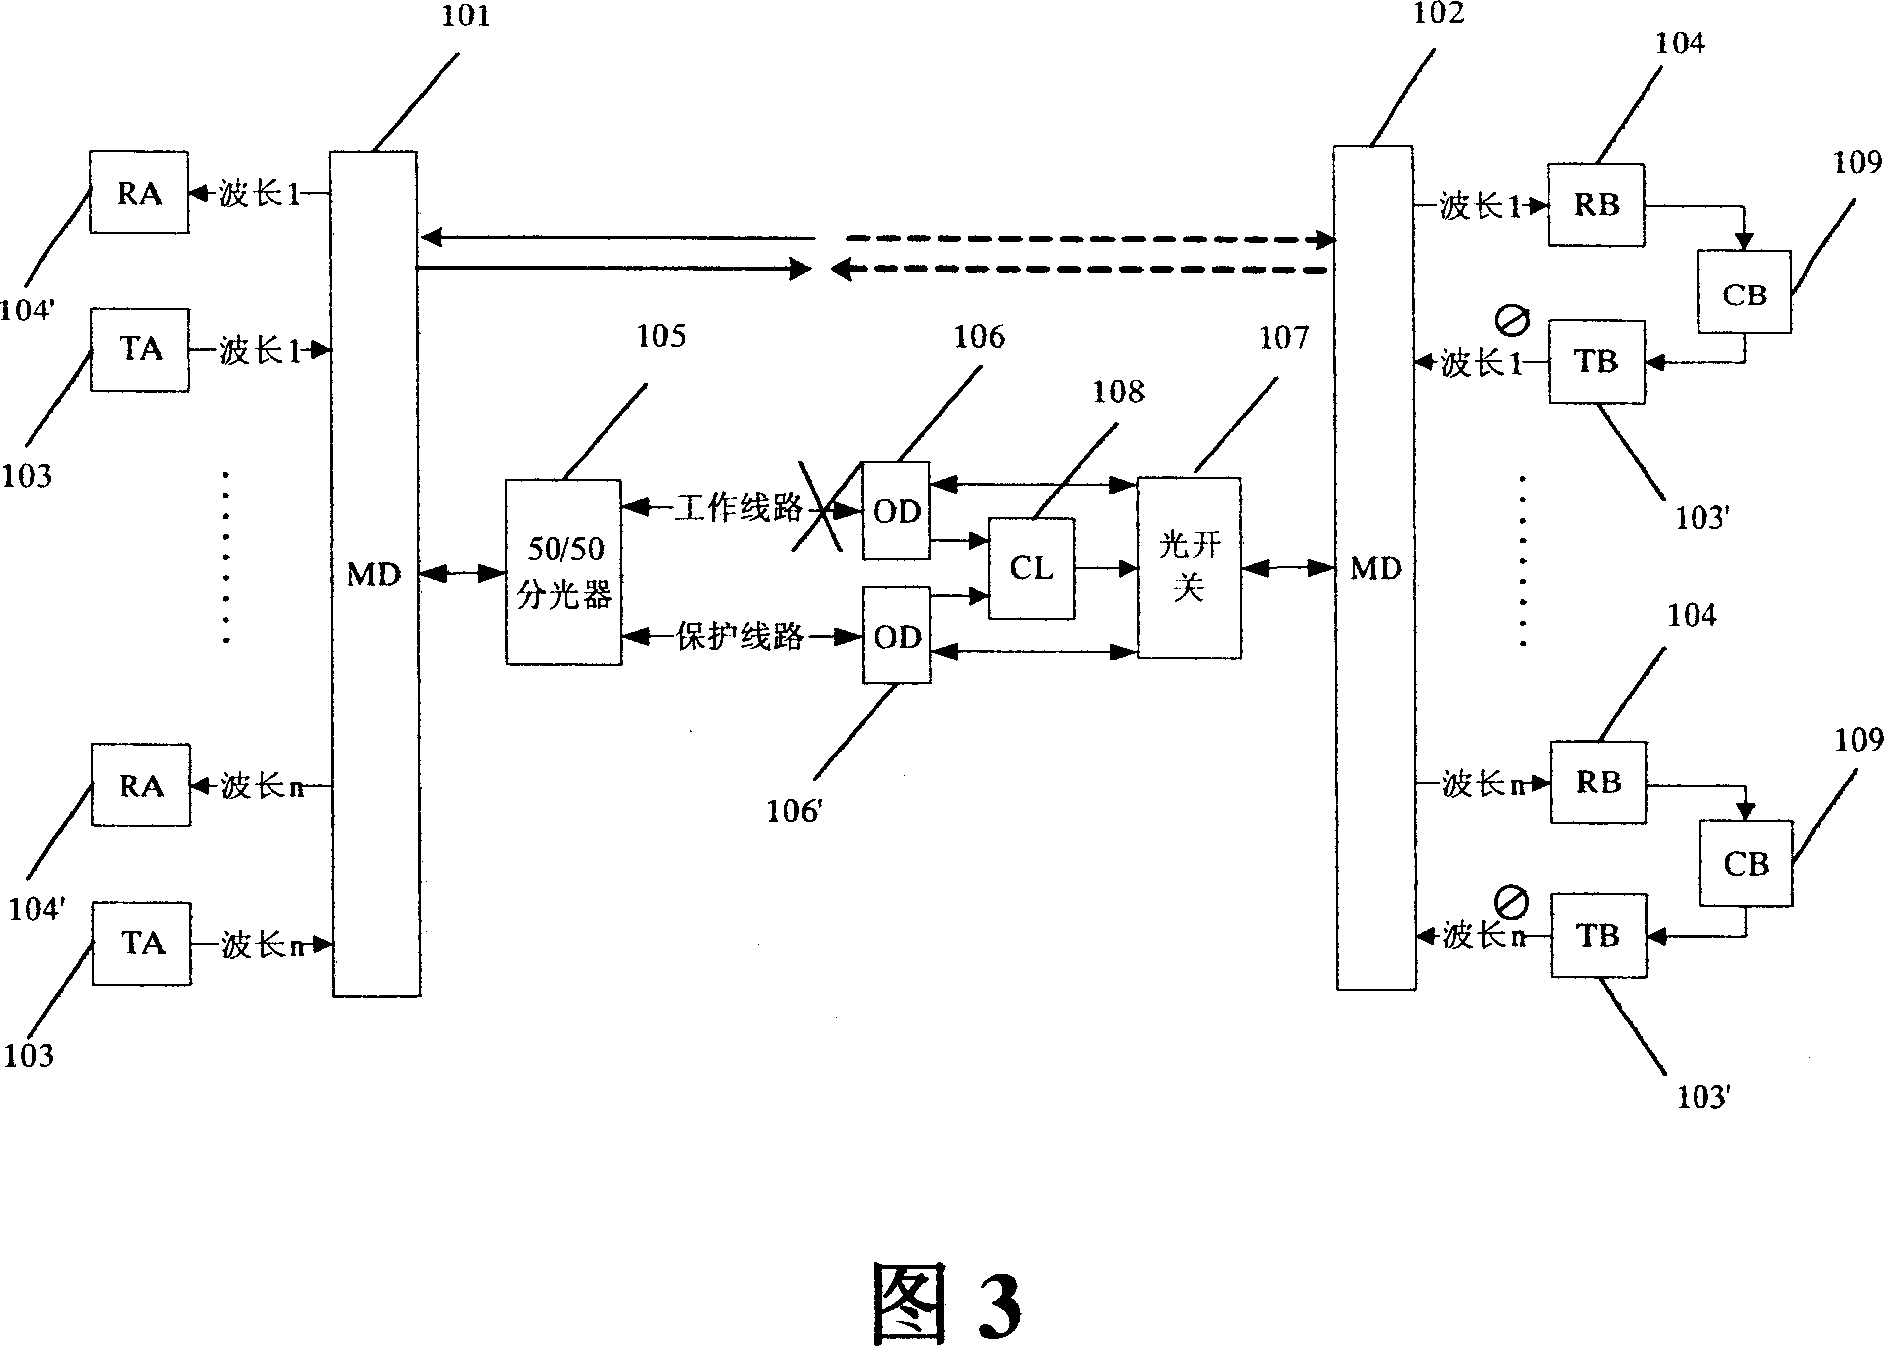 System for transmitting single-fiber-optic two-way wavelength division multiplexing and its protection